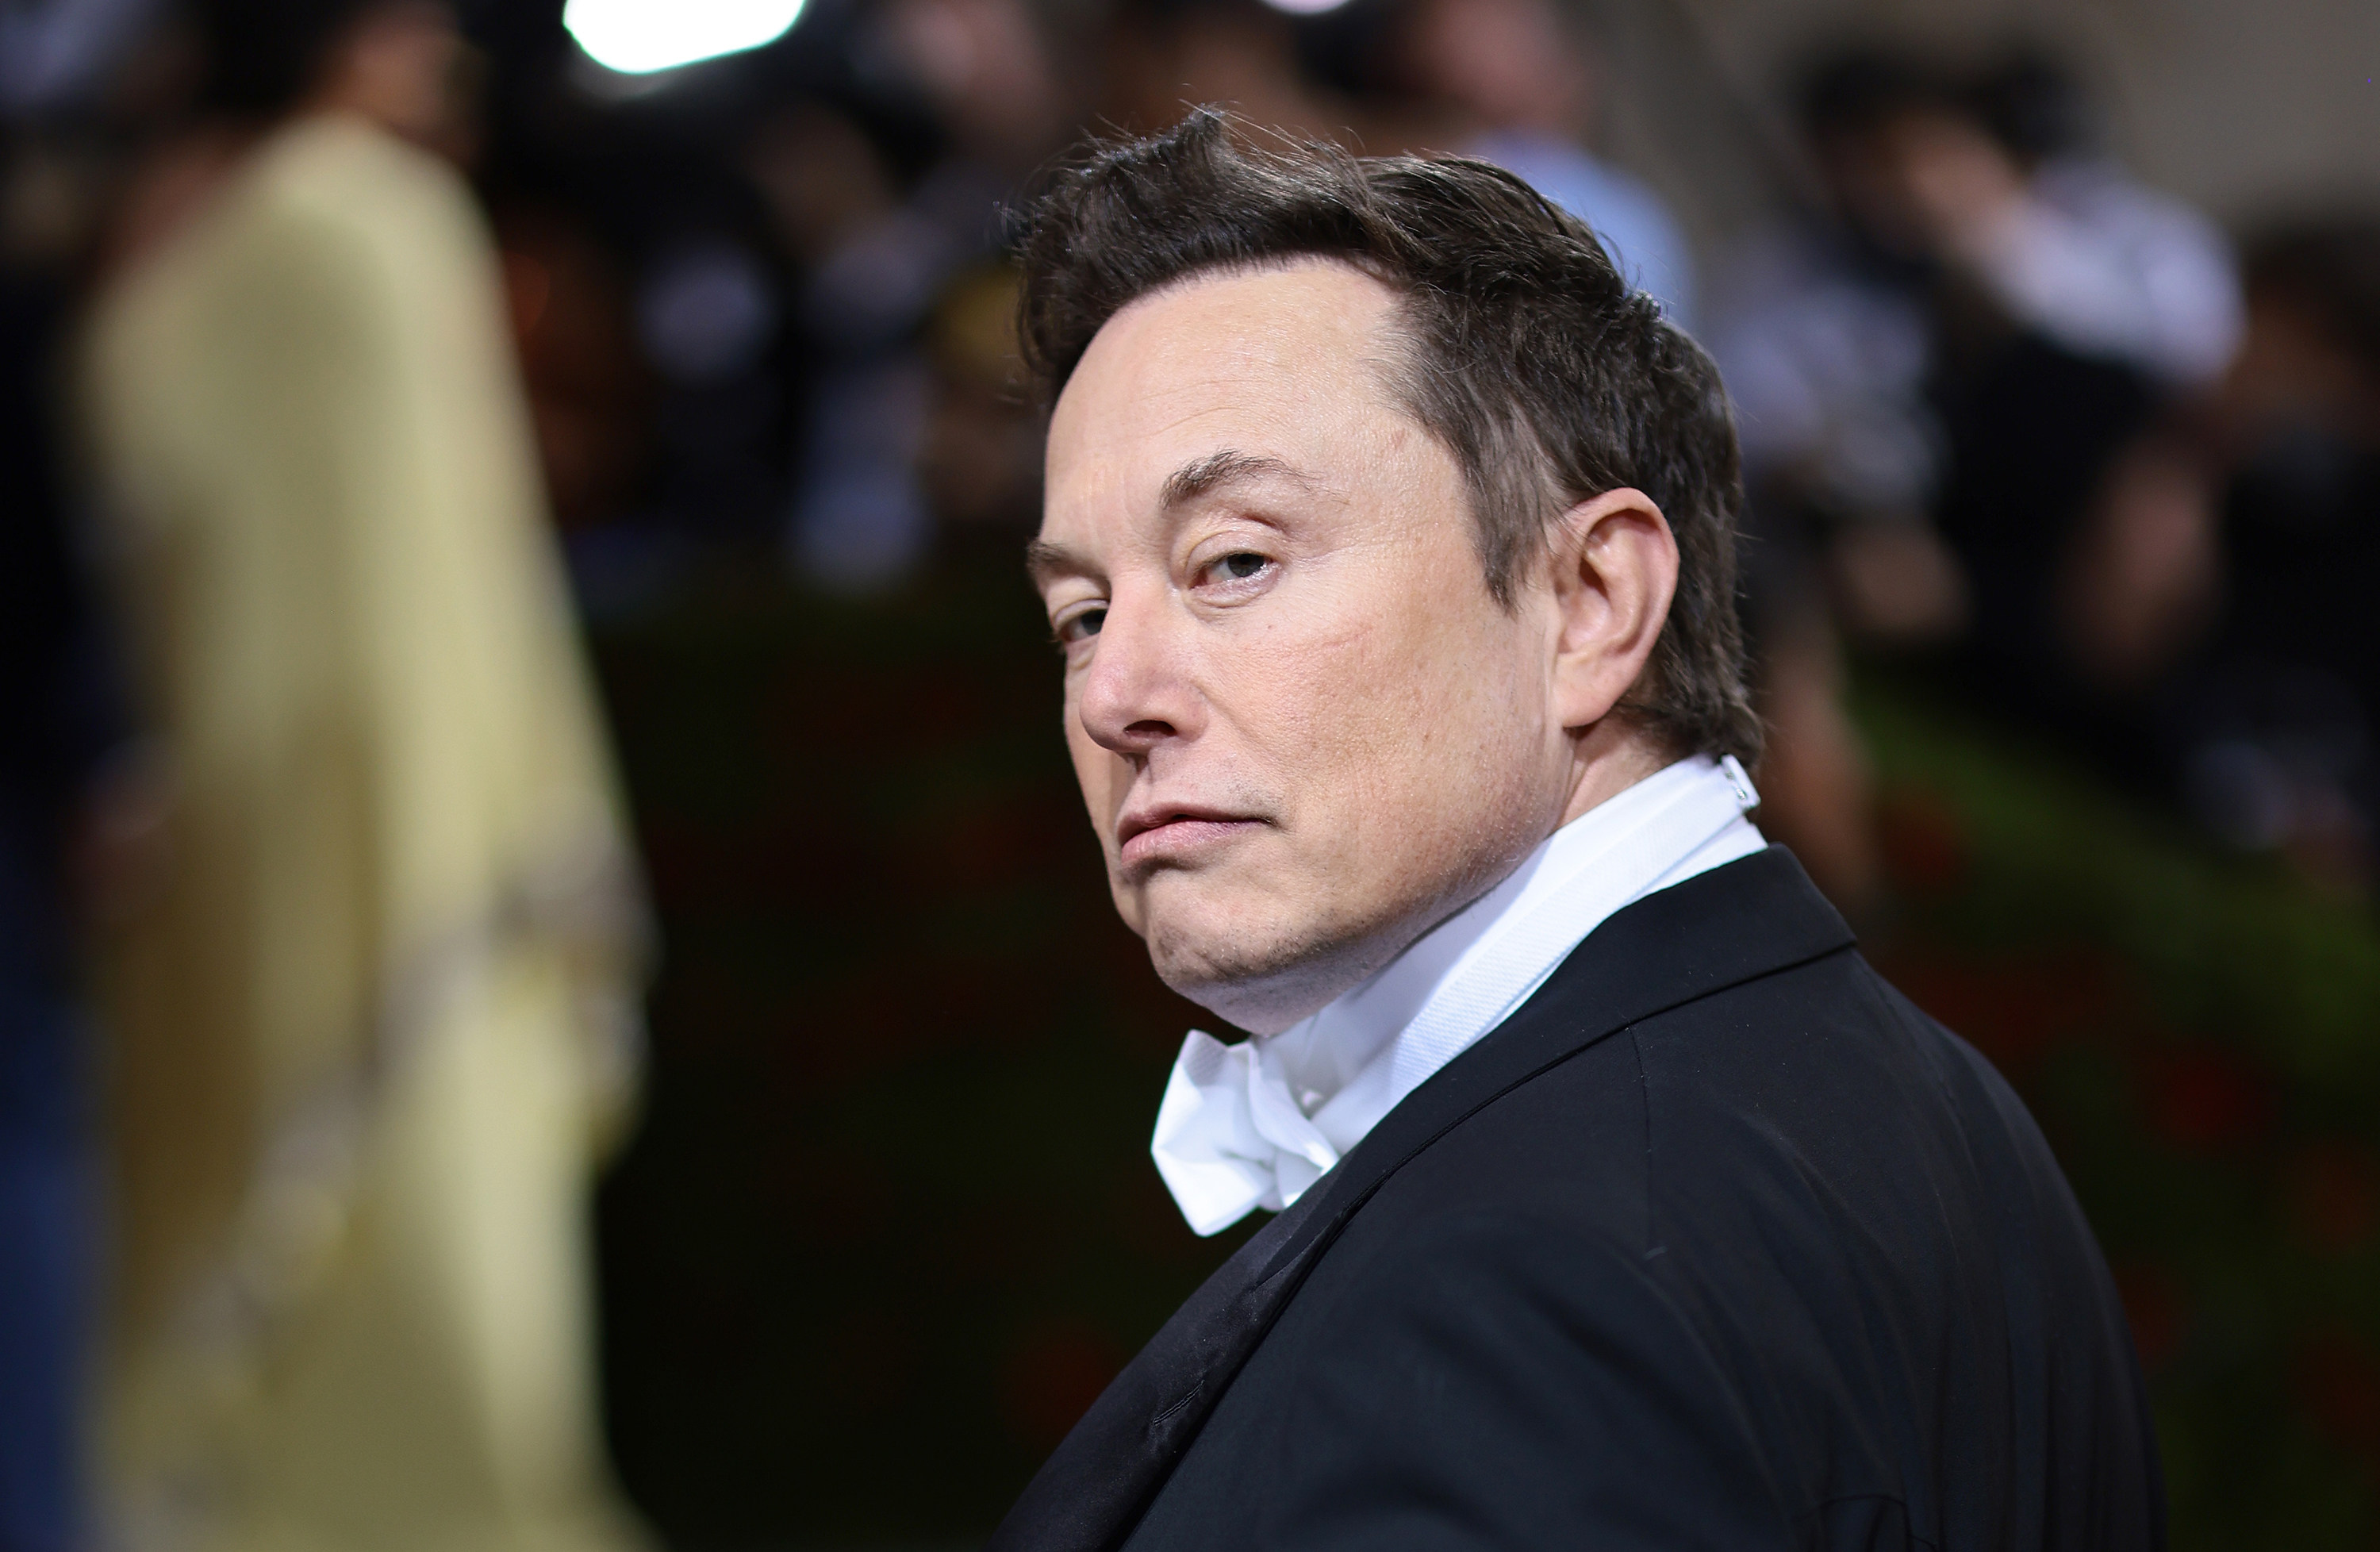 Elon Musk attends the Met Gala in New York in May. Photo: TNS